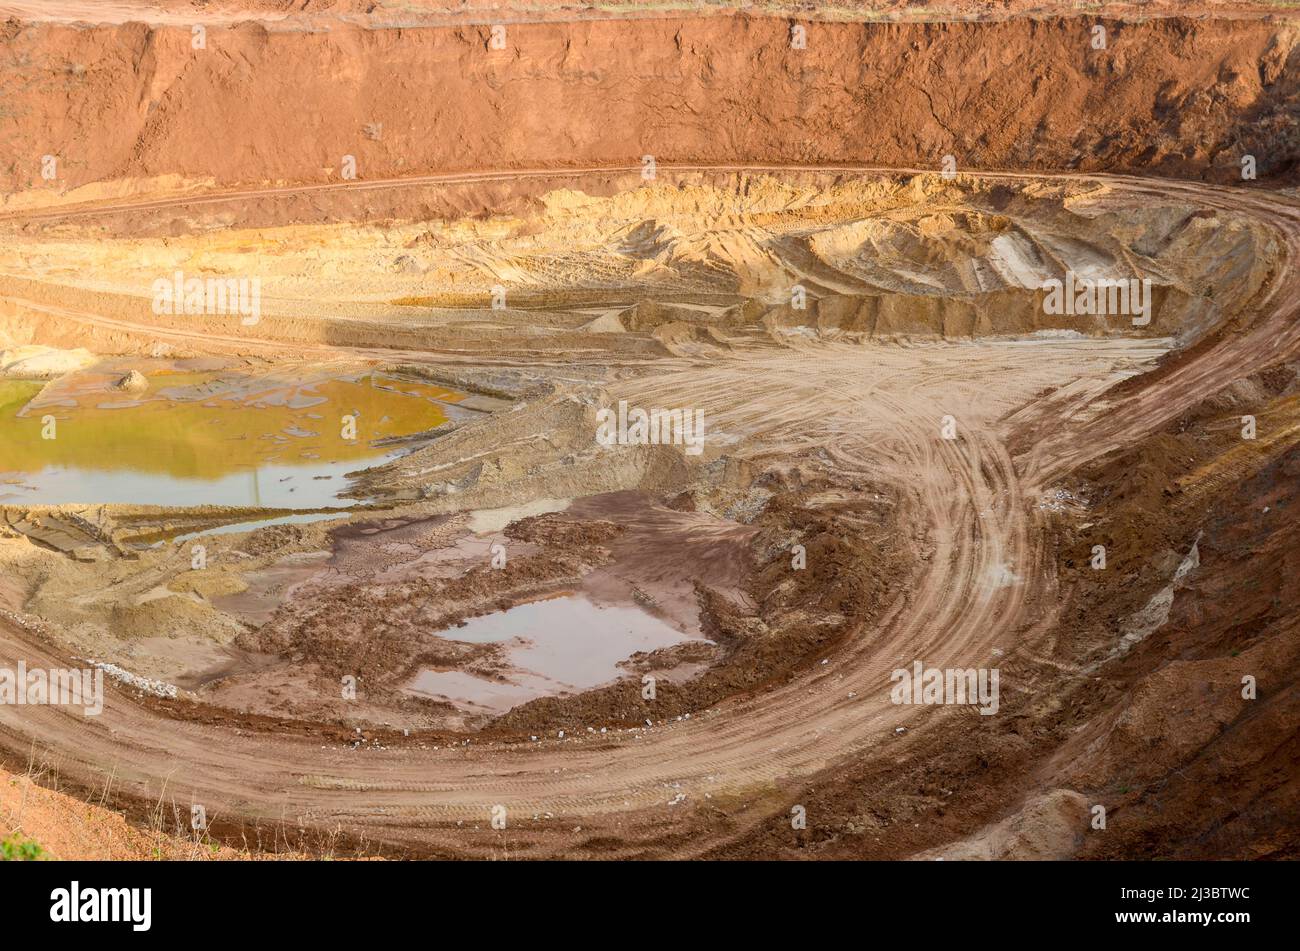 The development of sand in a quarry, sand quarry Stock Photo